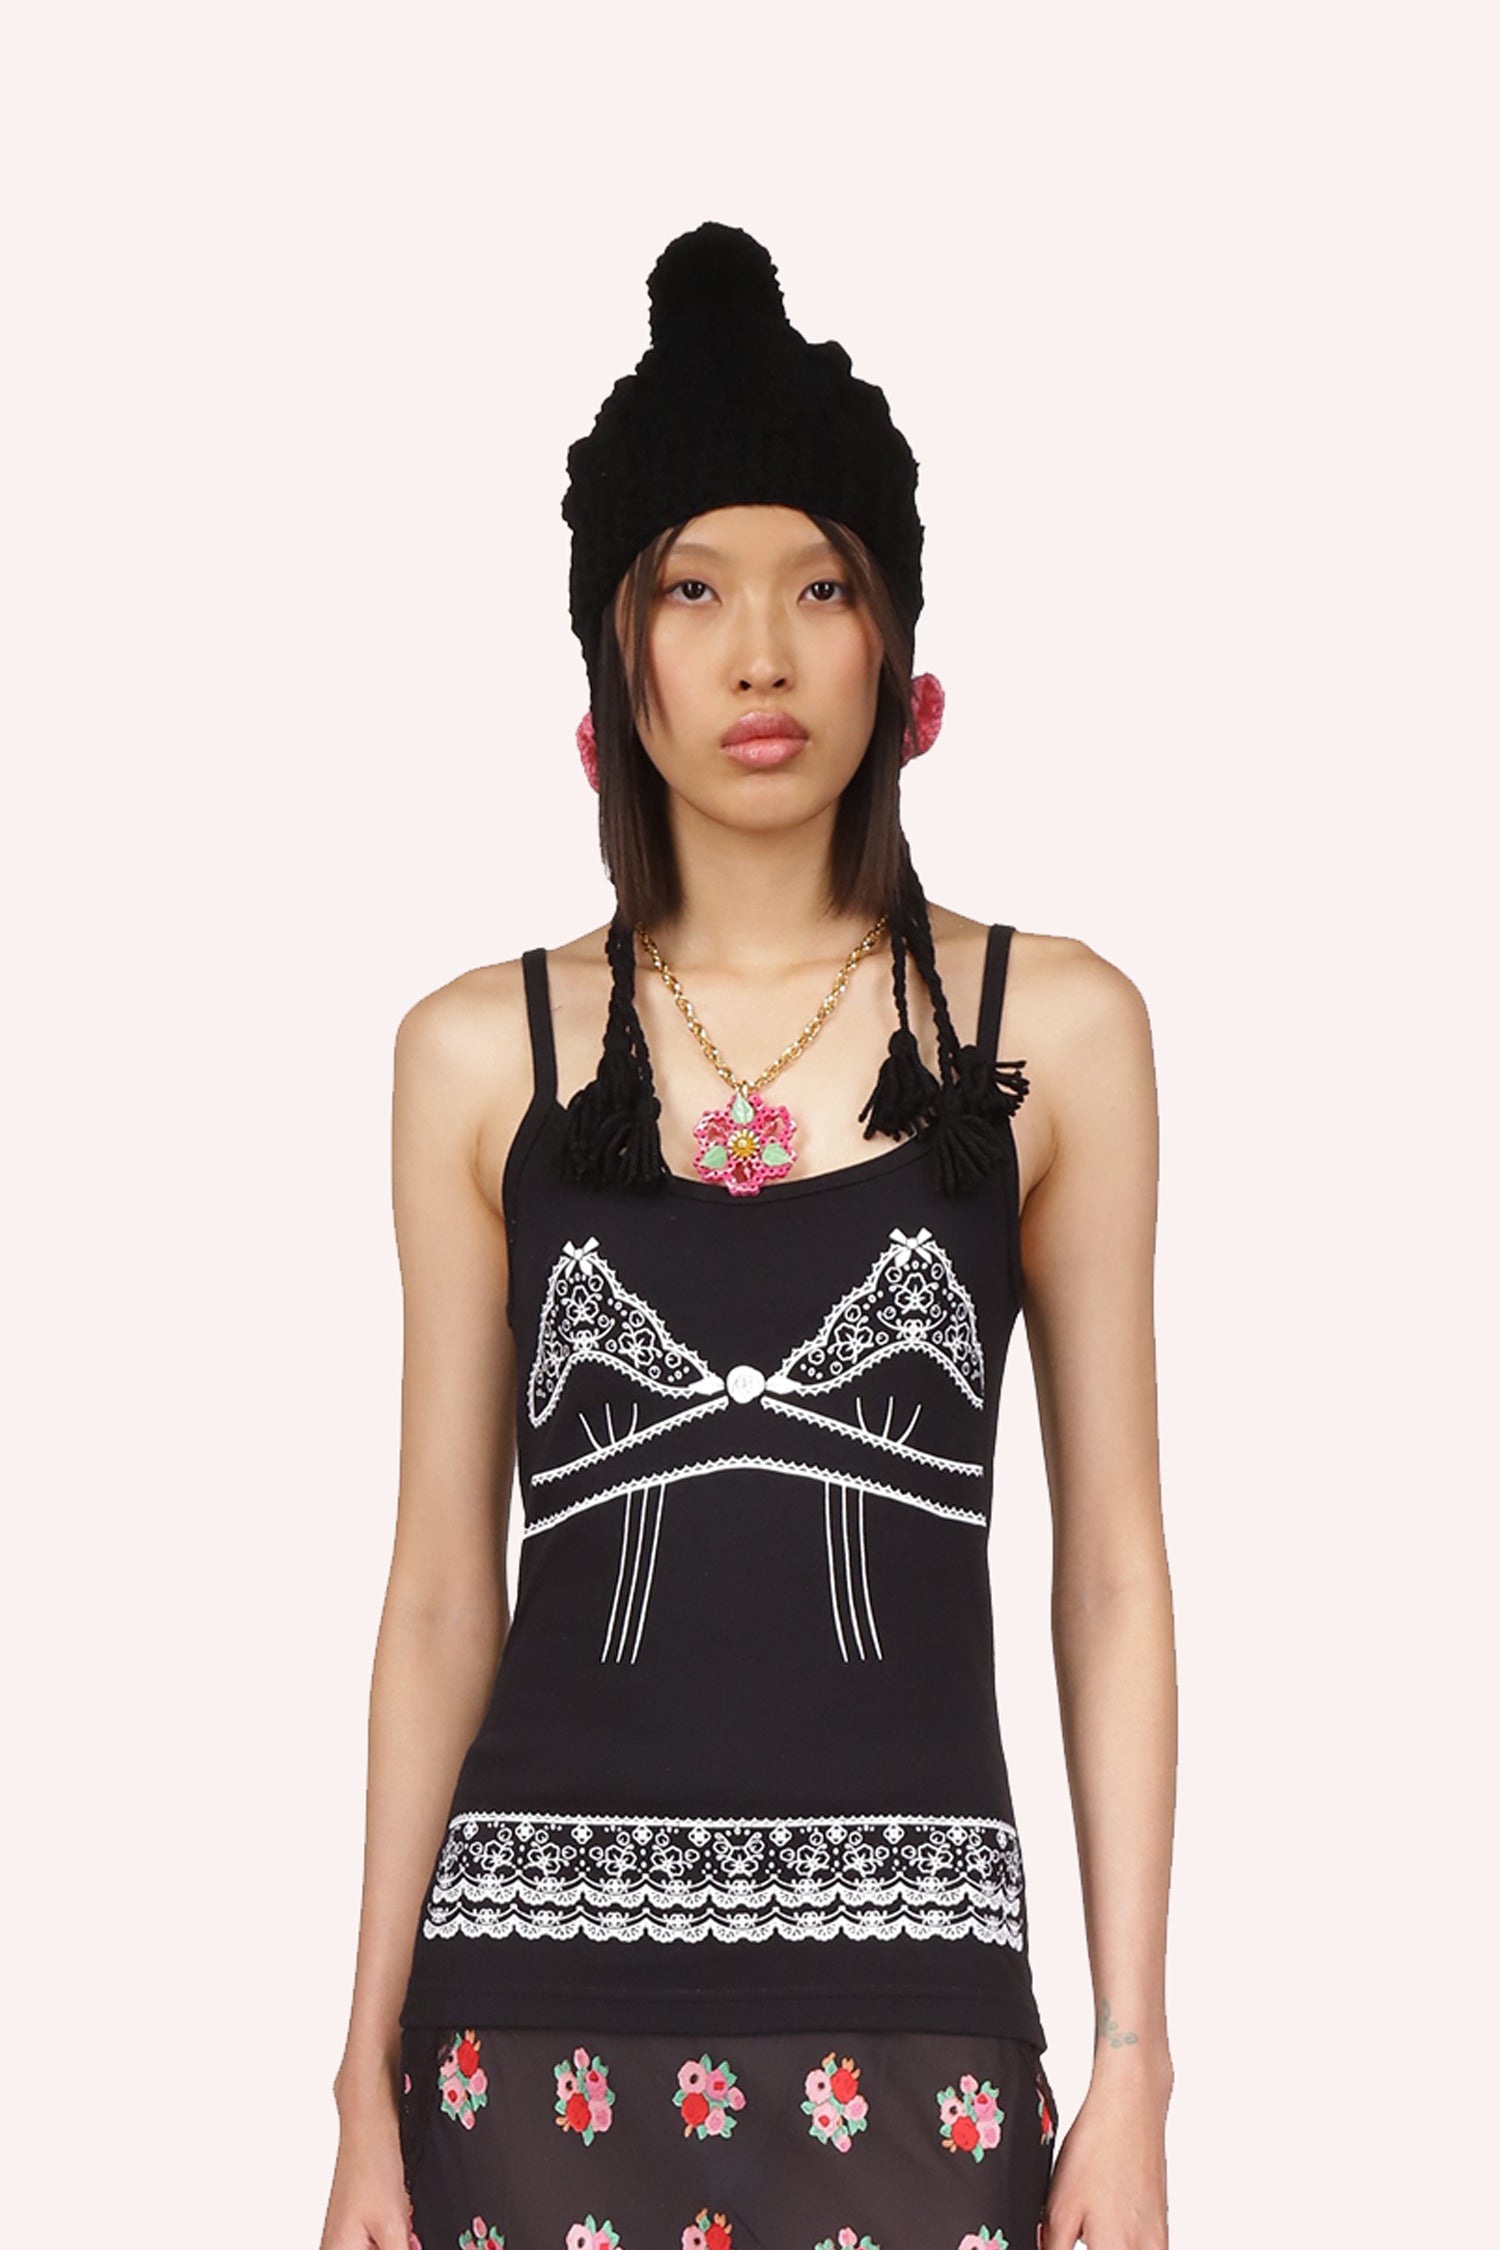 Blk Tank, 2-laced mountains over chest, stars on top, white ground lines, white lace at the bottom